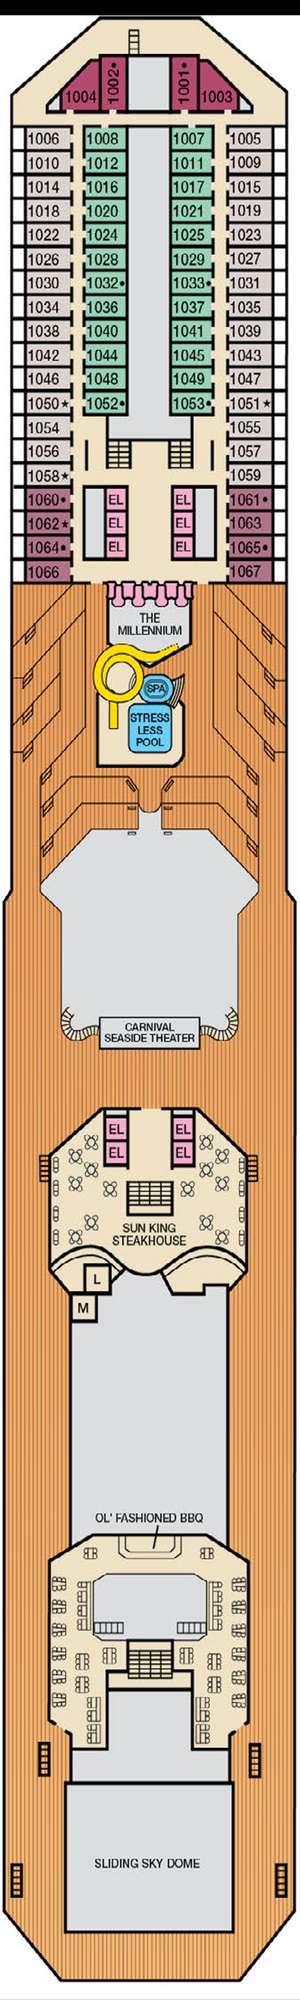 Deck plan for Carnival Freedom